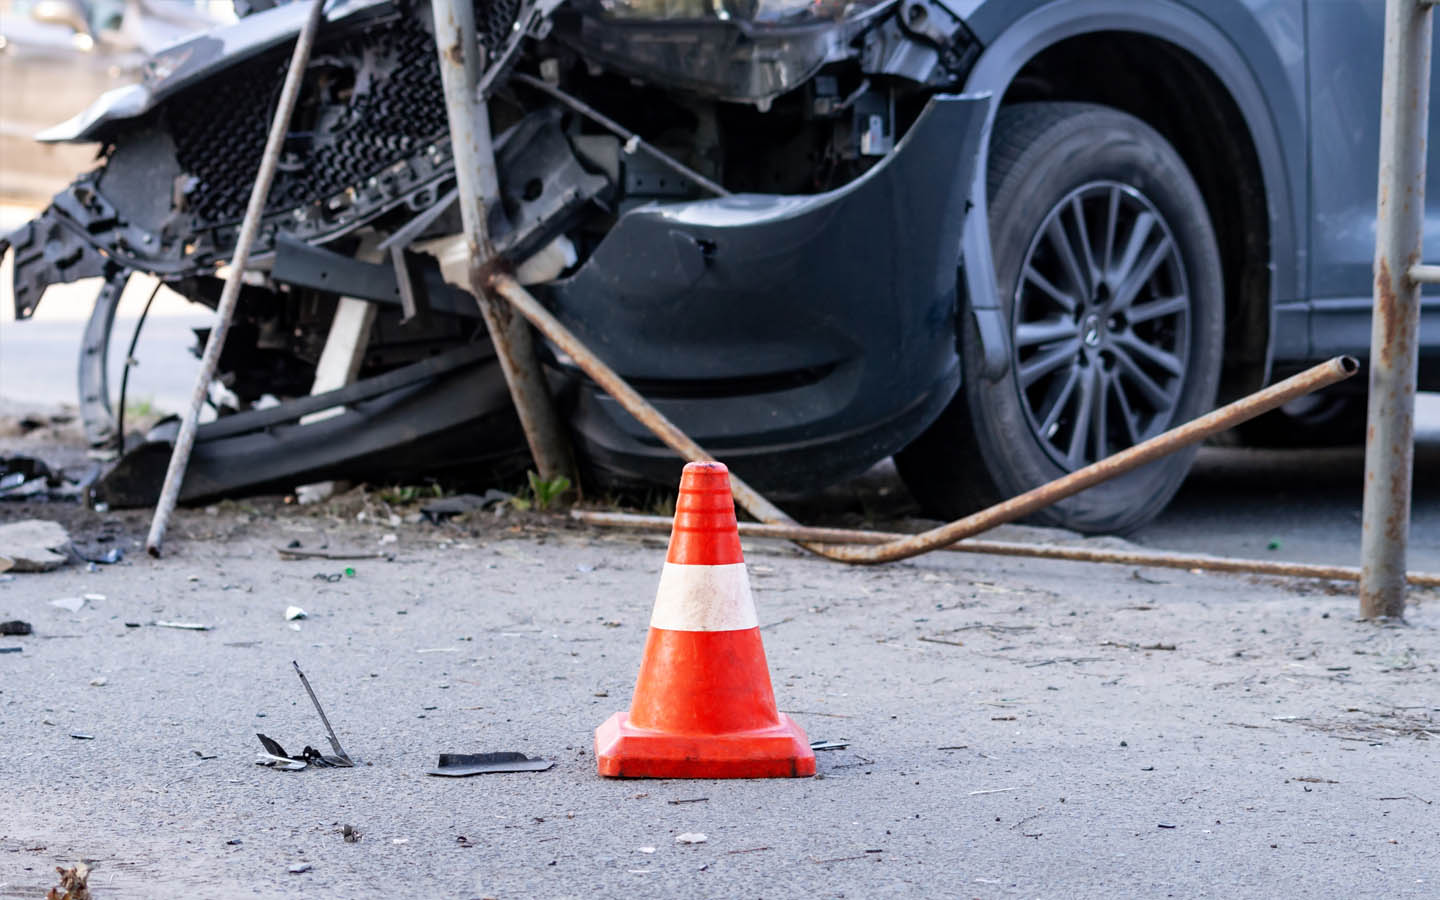 Car collisions can damage the engine requiring engine replacement ultimately.